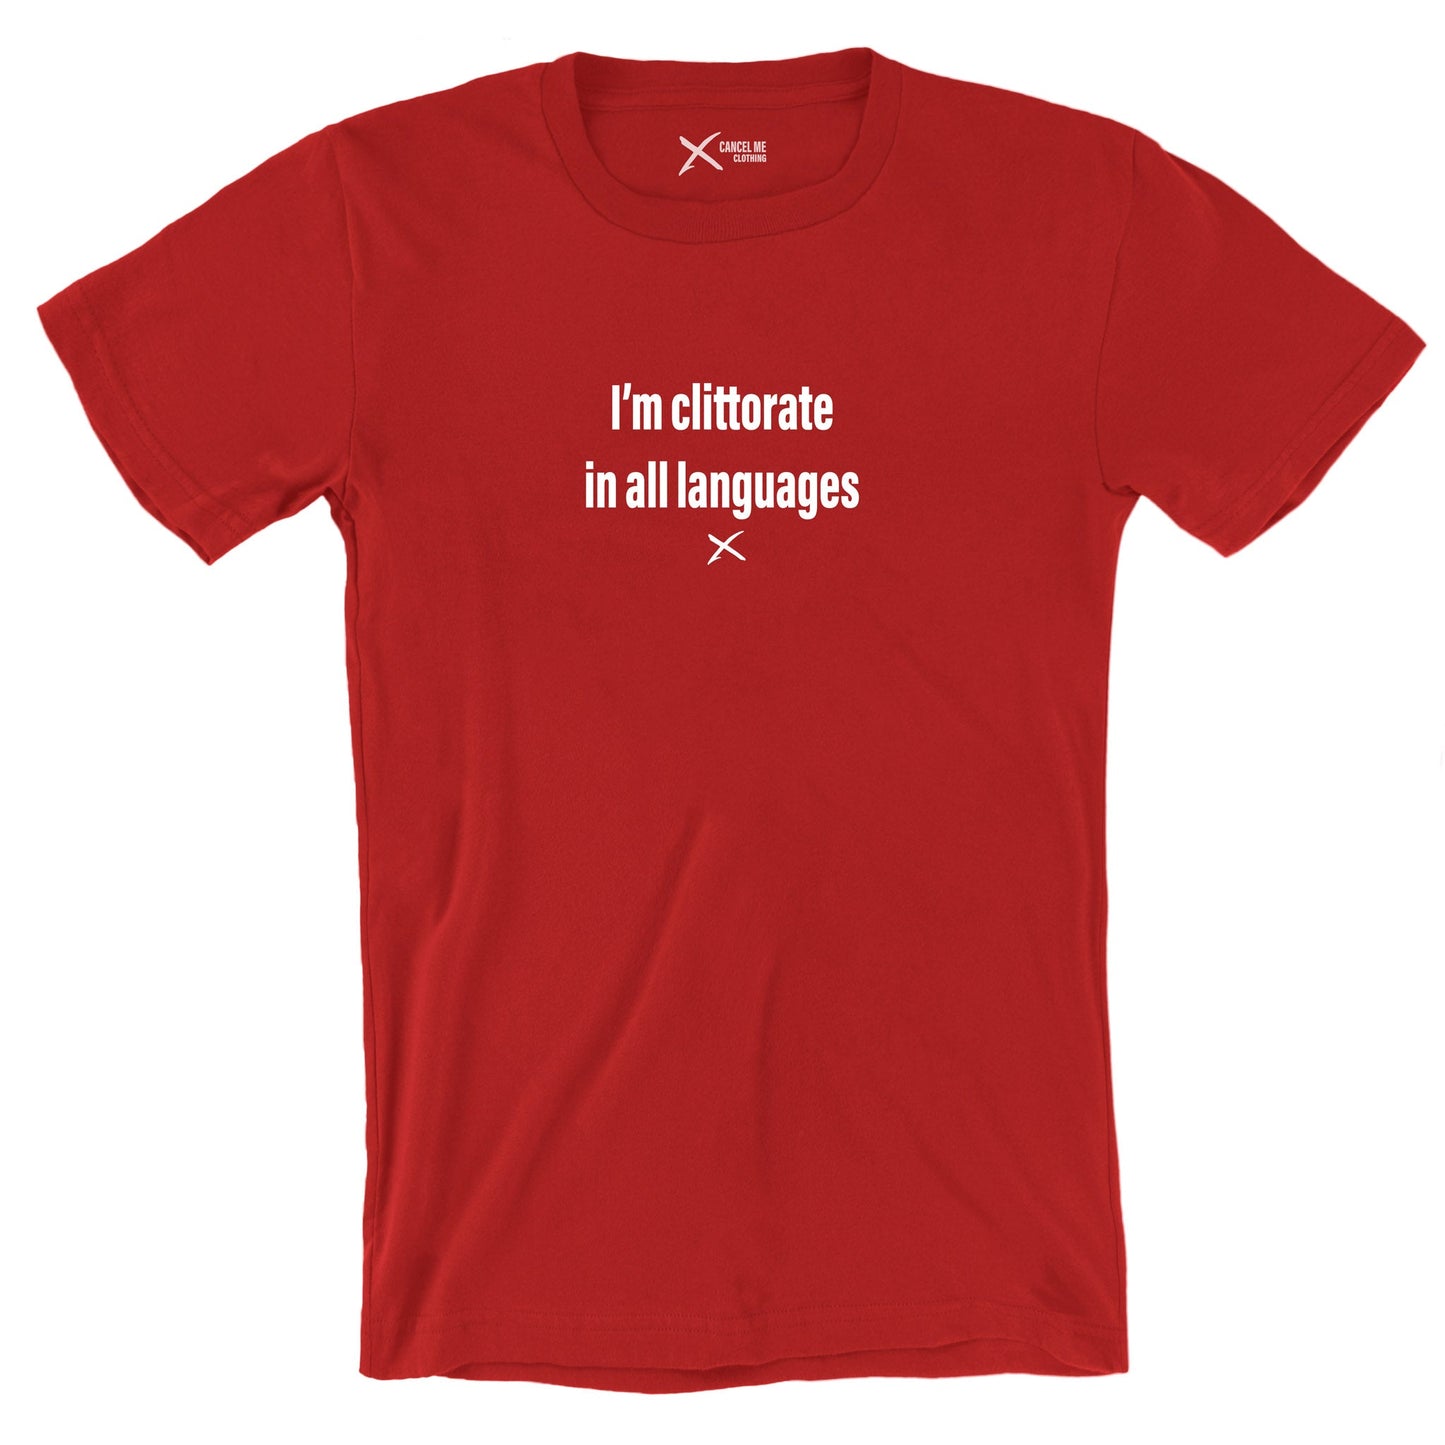 I'm clittorate in all languages - Shirt